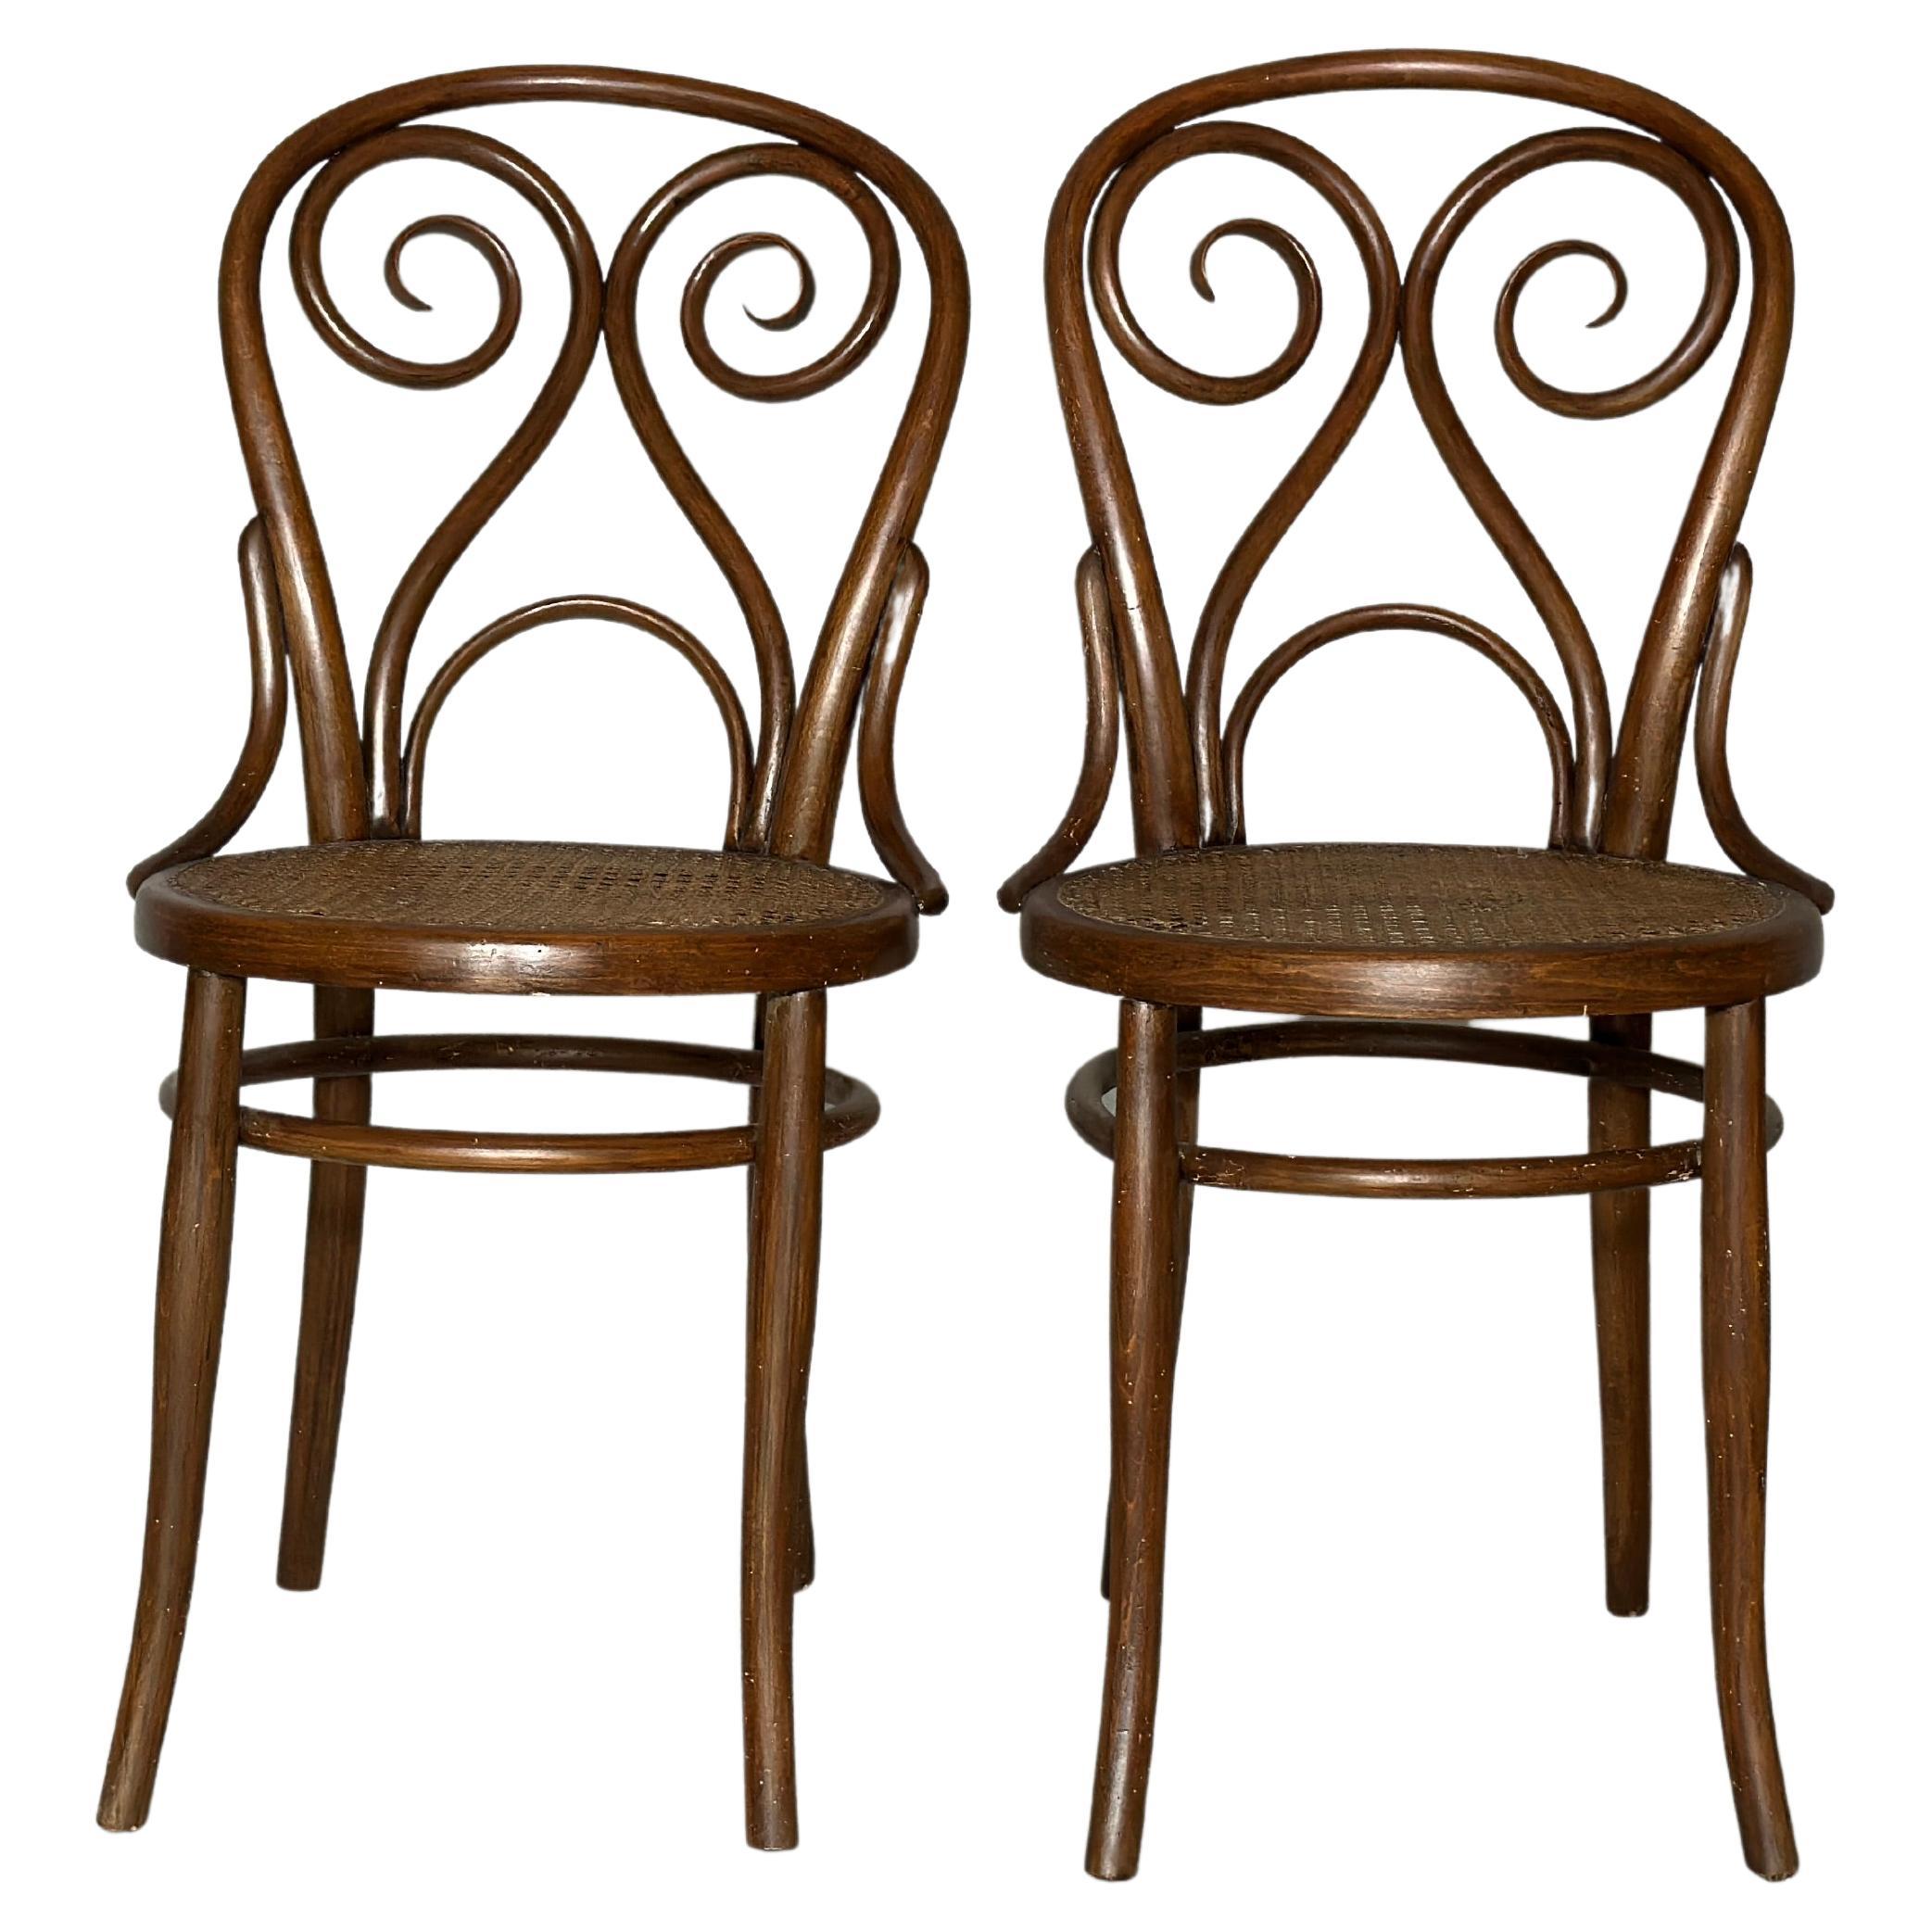 Harnisch and Co chair Wiena 1880s  Set of Two For Sale